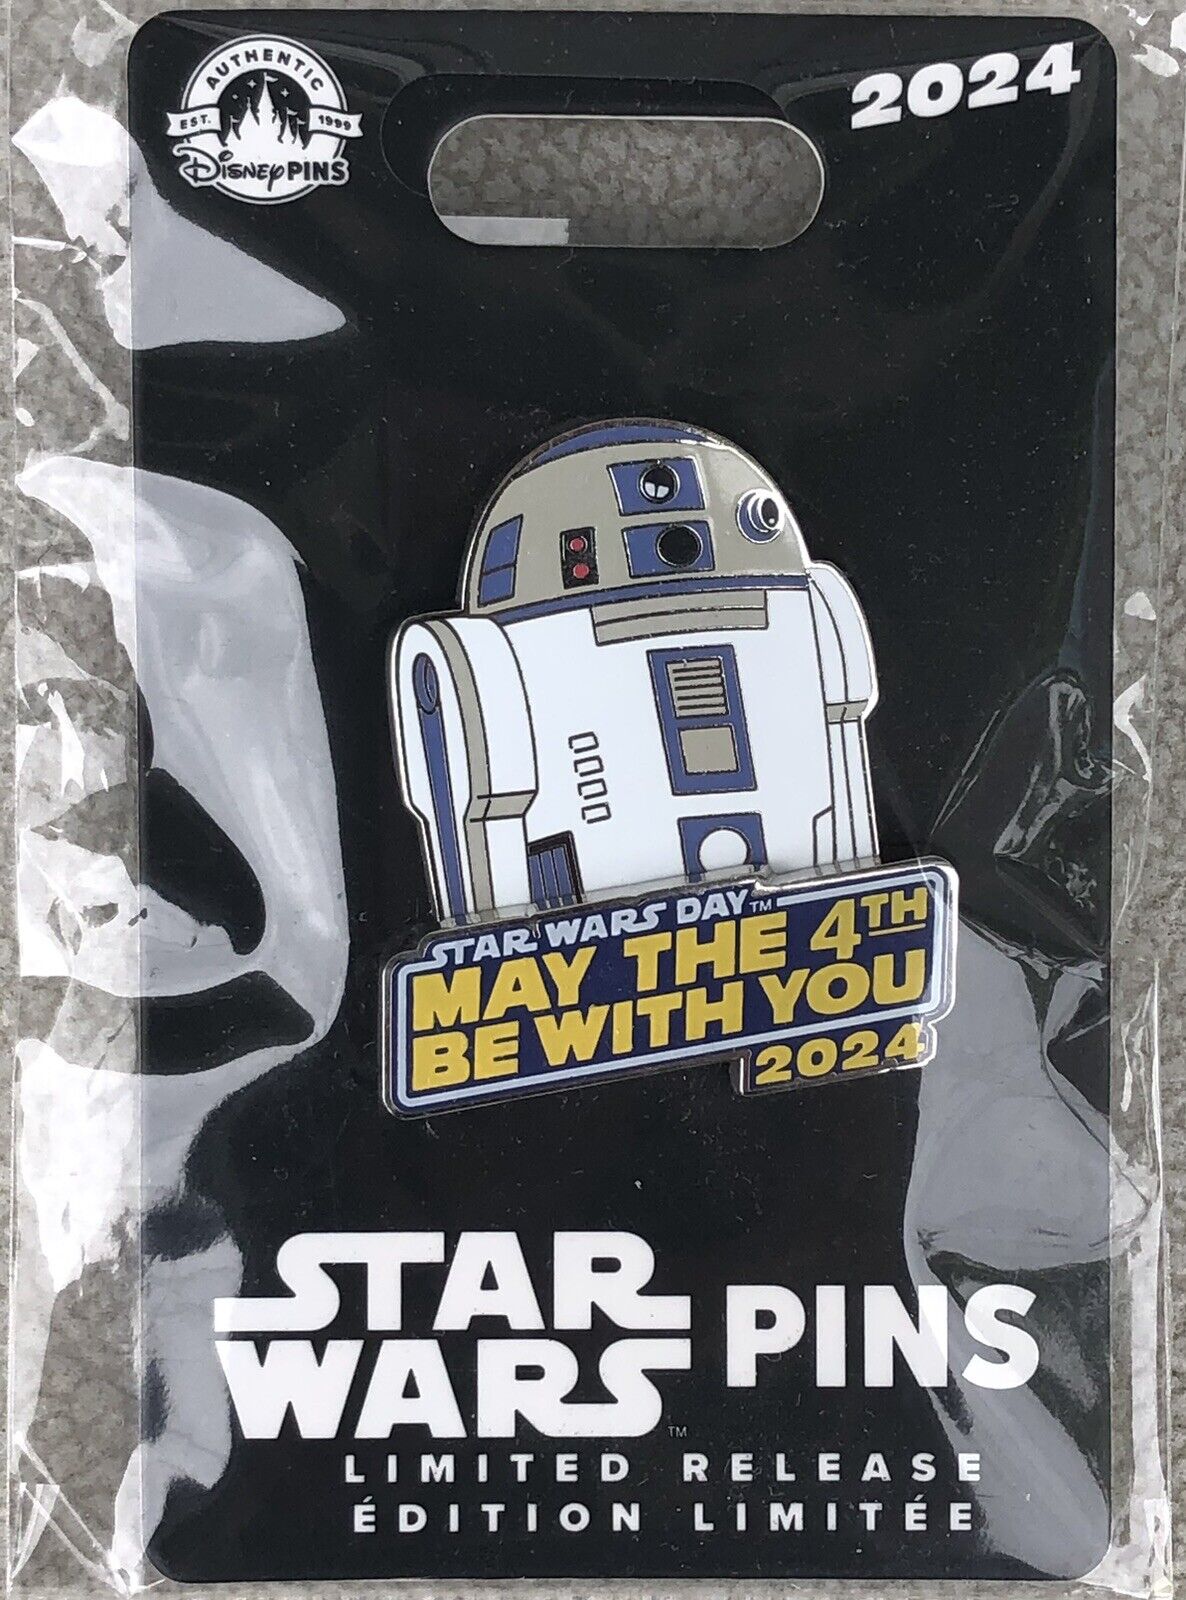 Disney Star Wars 2024 May the 4th Be with you R2D2 Pin - New